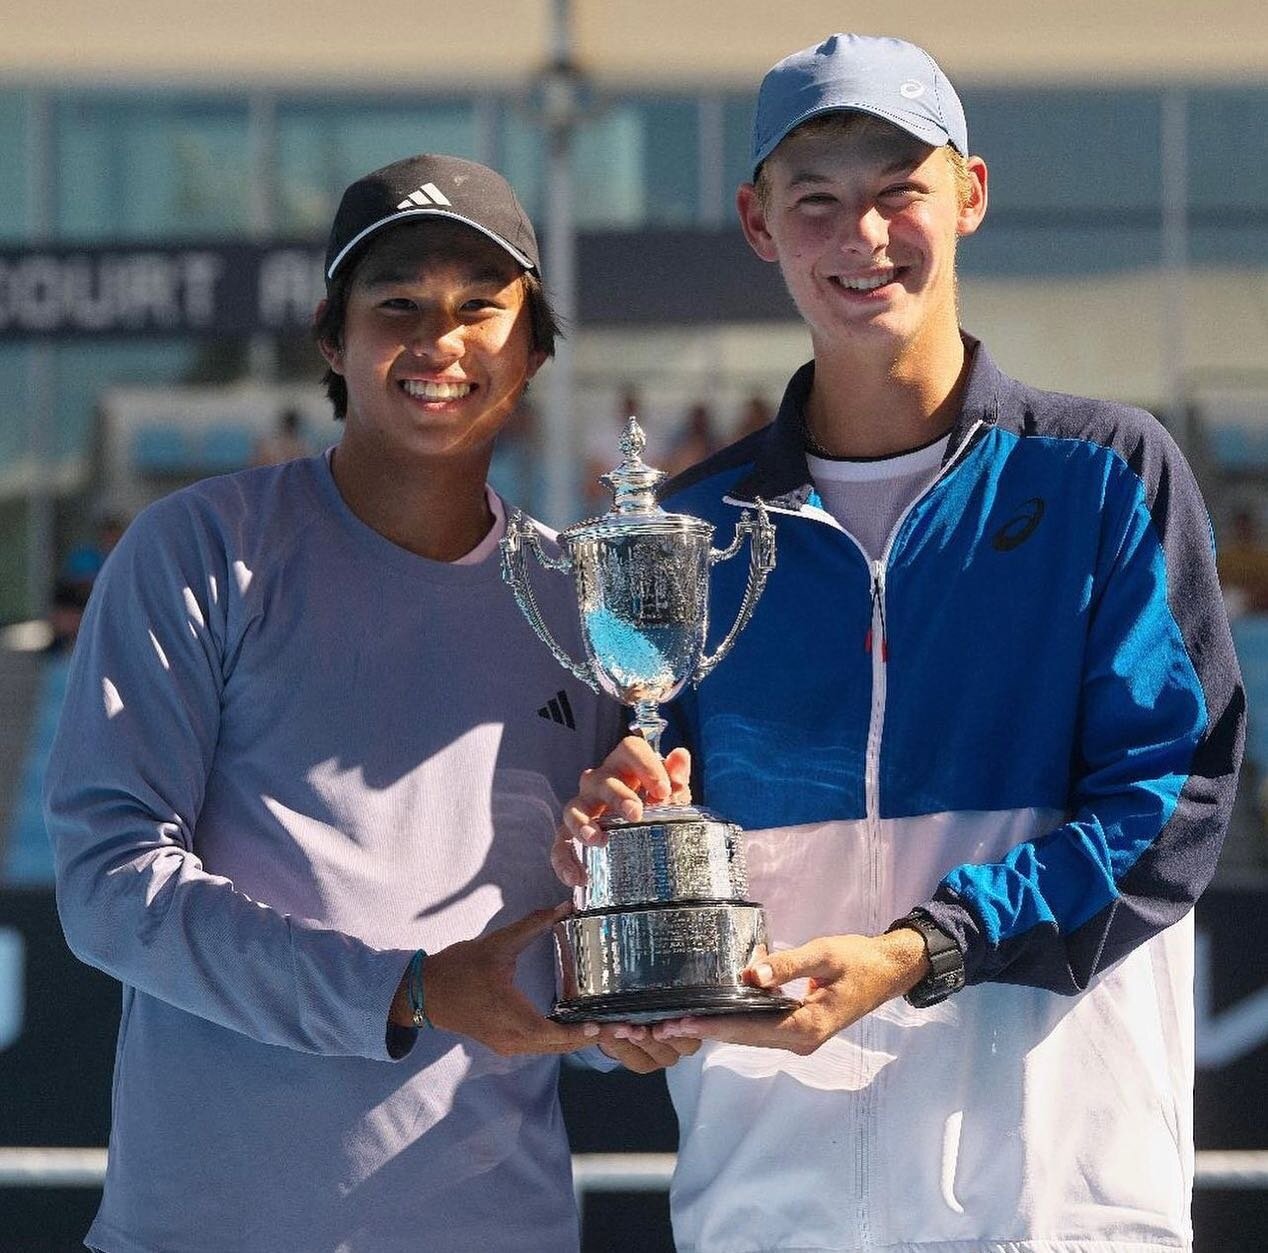 🏆 Titletown for First Break Alum, Learner Tien! #AustralianOpen Junior Boys&rsquo; Doubles Champion &amp; Singles Finalist 🇺🇸🔥 We&rsquo;re so proud of his extraordinary work down under! 

#AO2023 #USC #USCTrojans #SoCalTennis #JuniorTennis #Colle